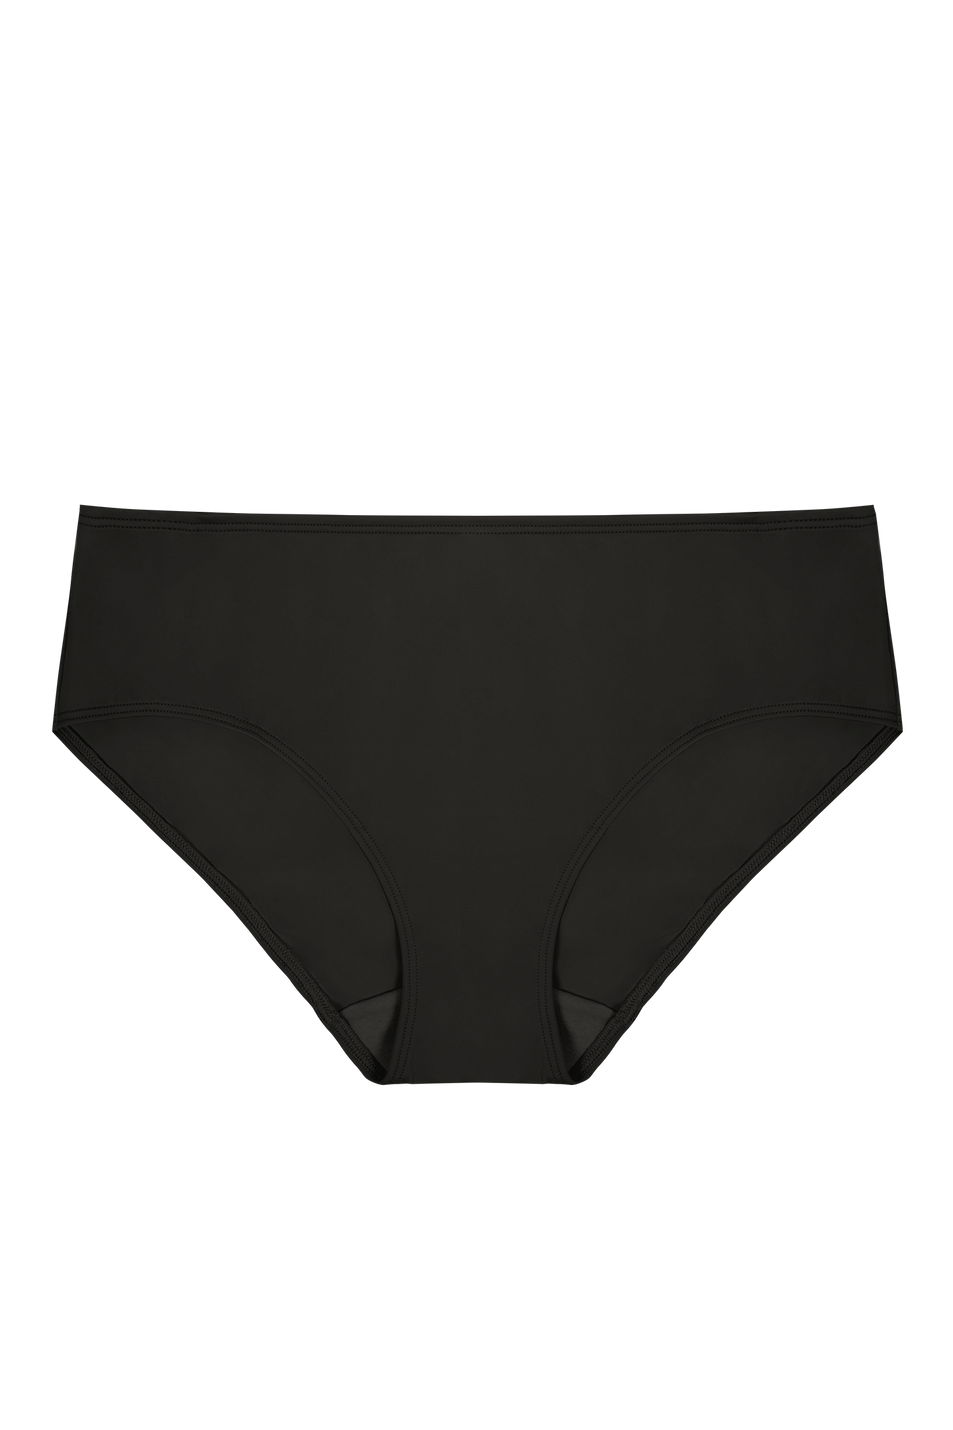 Buy SMOOTH BRIEF online at Intimo